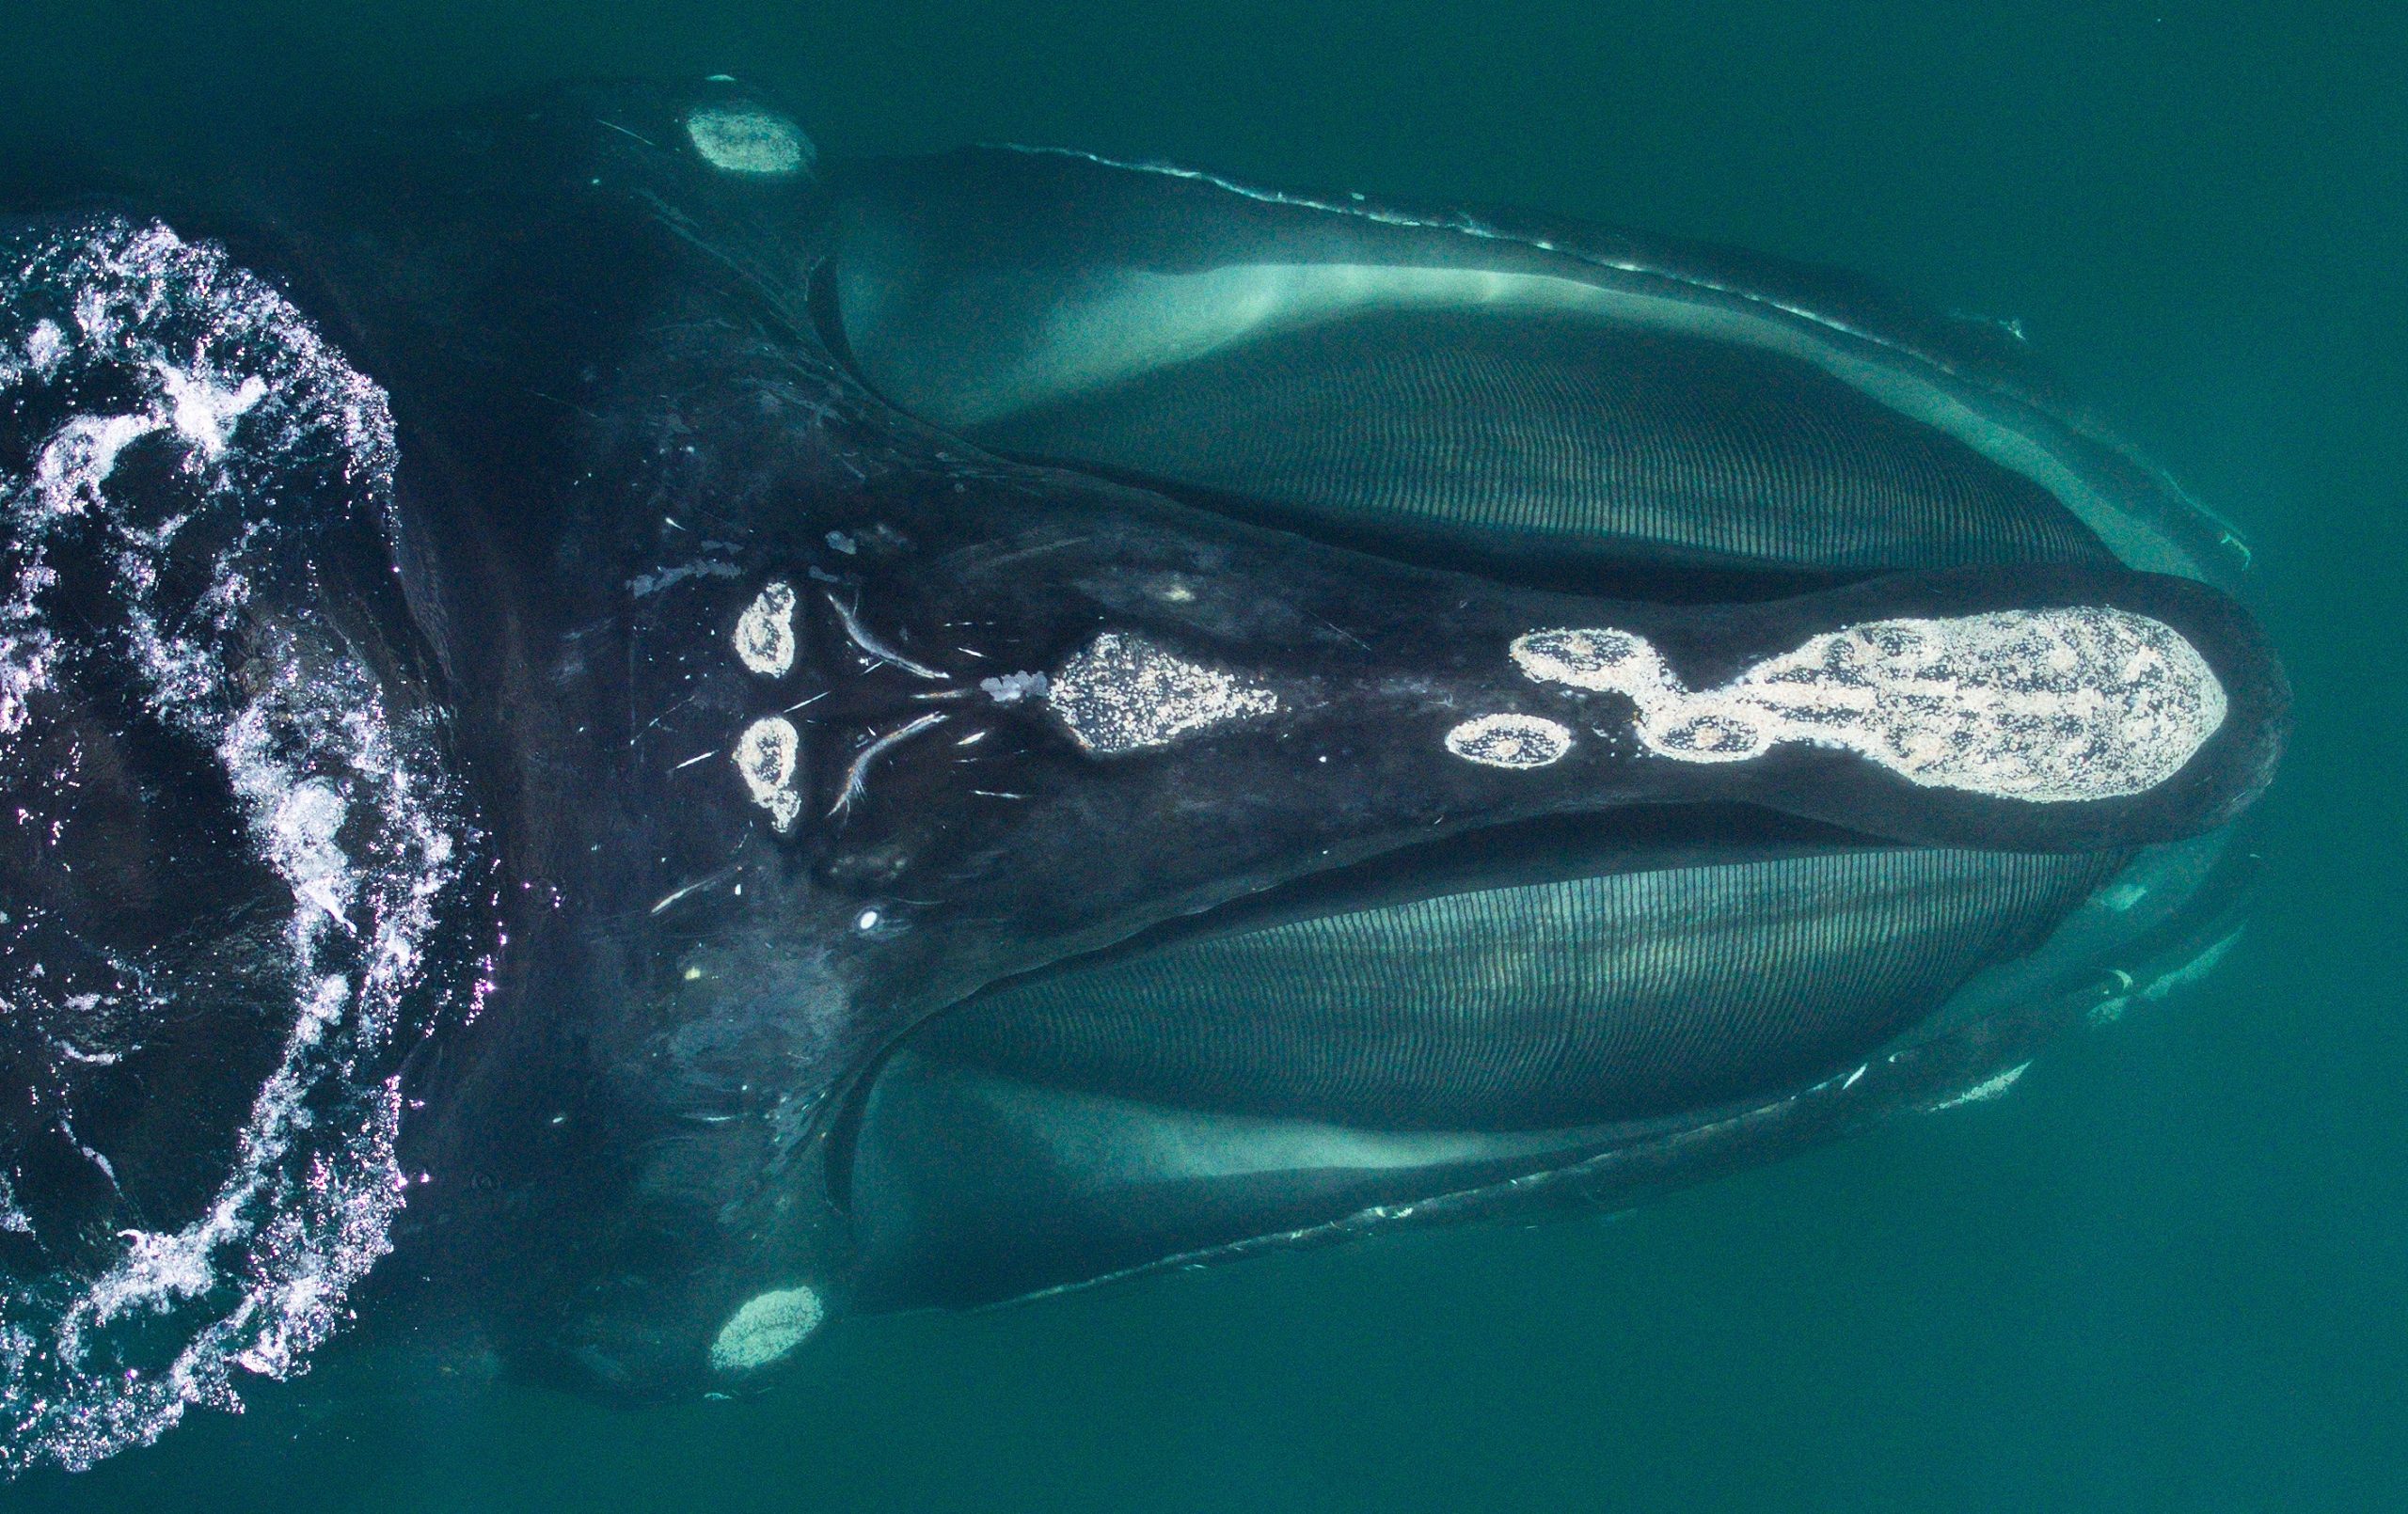 A North Atlantic right whale in Cape Cod Bay. The callosity patterns on each whale's head are unique and allow for identification, along with tracking of impacts such as entanglements and vessel strikes, reproductive histories, and ages of individual whales. (Photo: John Durban (NOAA) and Holly Fearnbach (SR3), authorised by NMFS research permit #17355)